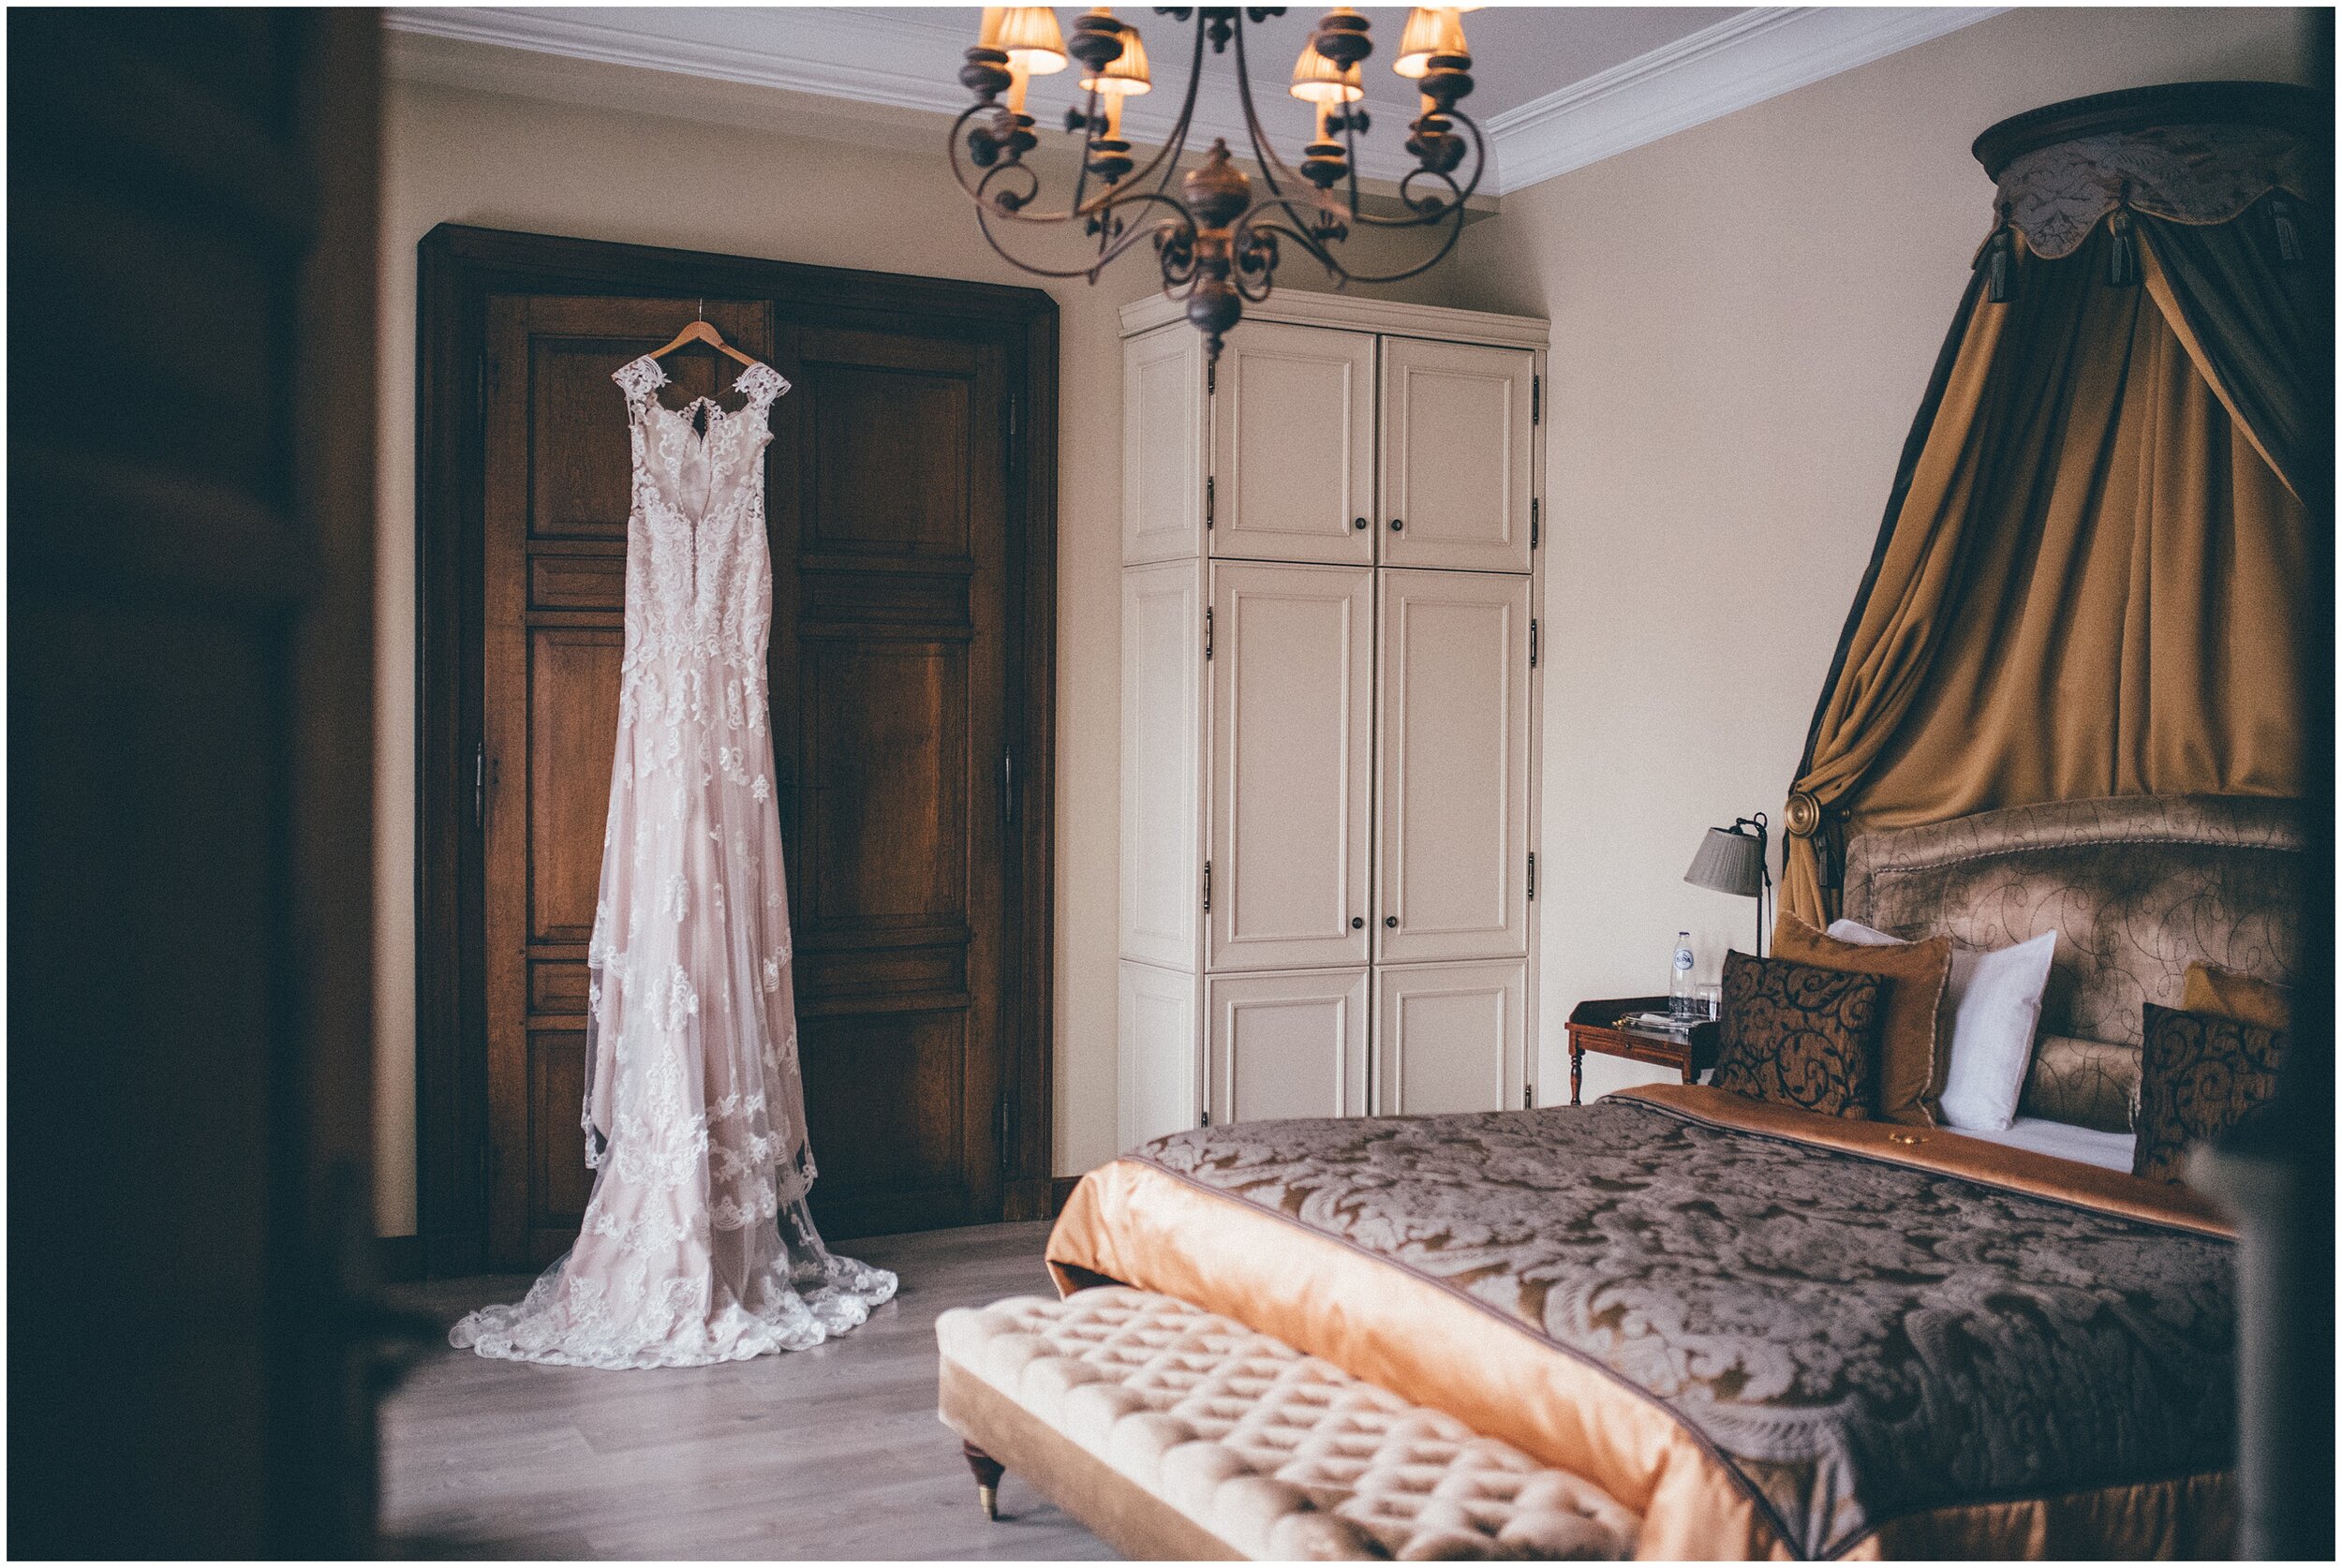 Lacy Essence of Australia gown hung up in the bridal suite of a snowy castle in Luxembourg